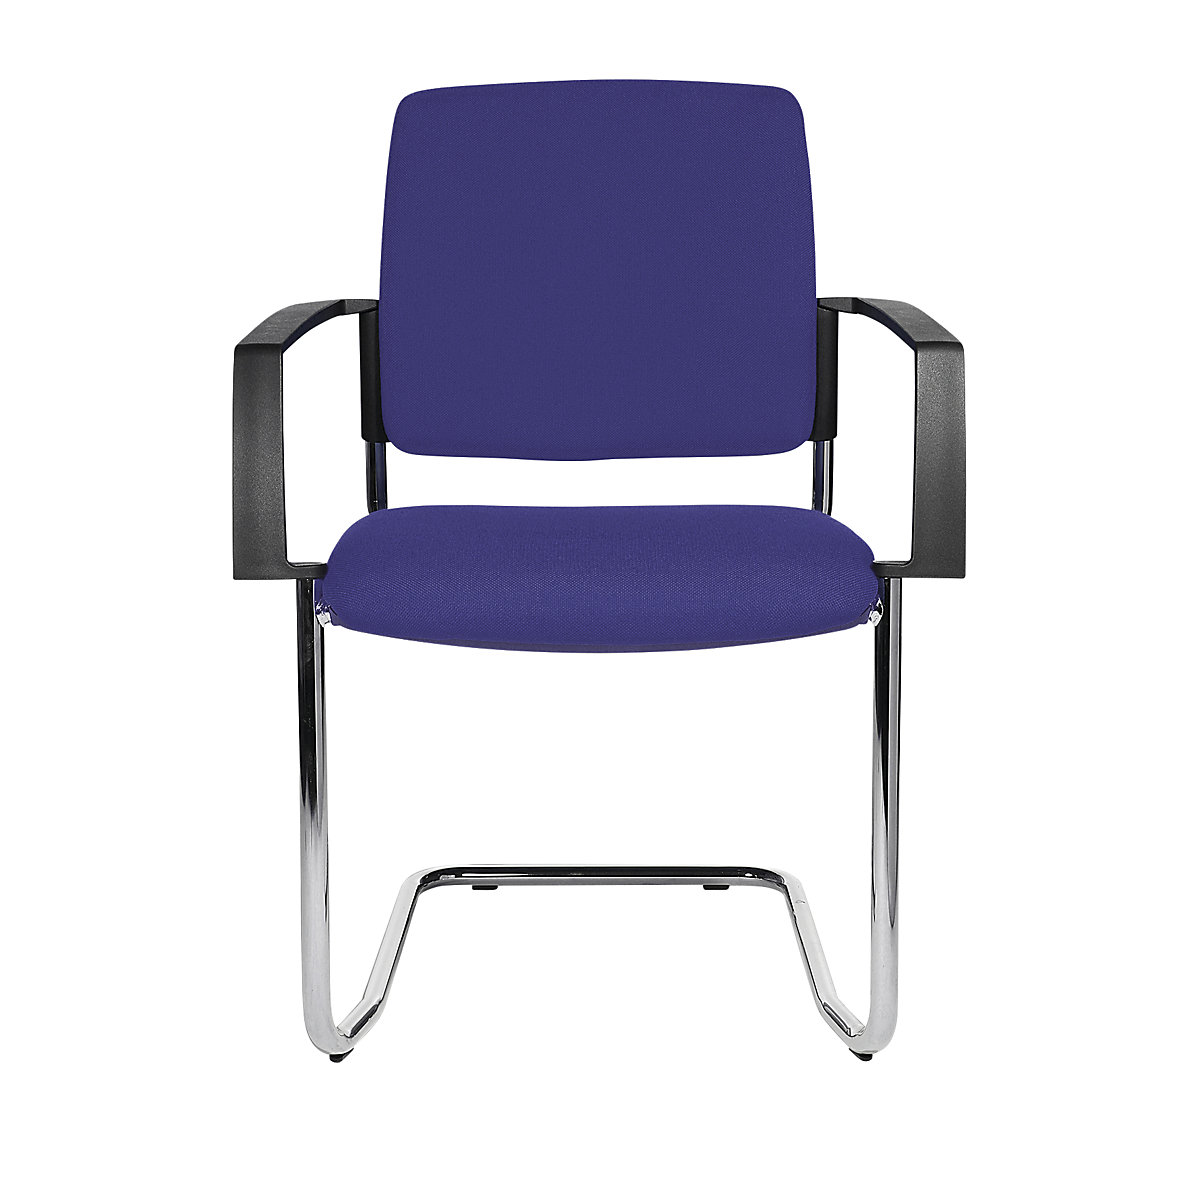 Padded stacking chair – Topstar, cantilever chair, pack of 2, chrome plated frame, blue upholstery-1